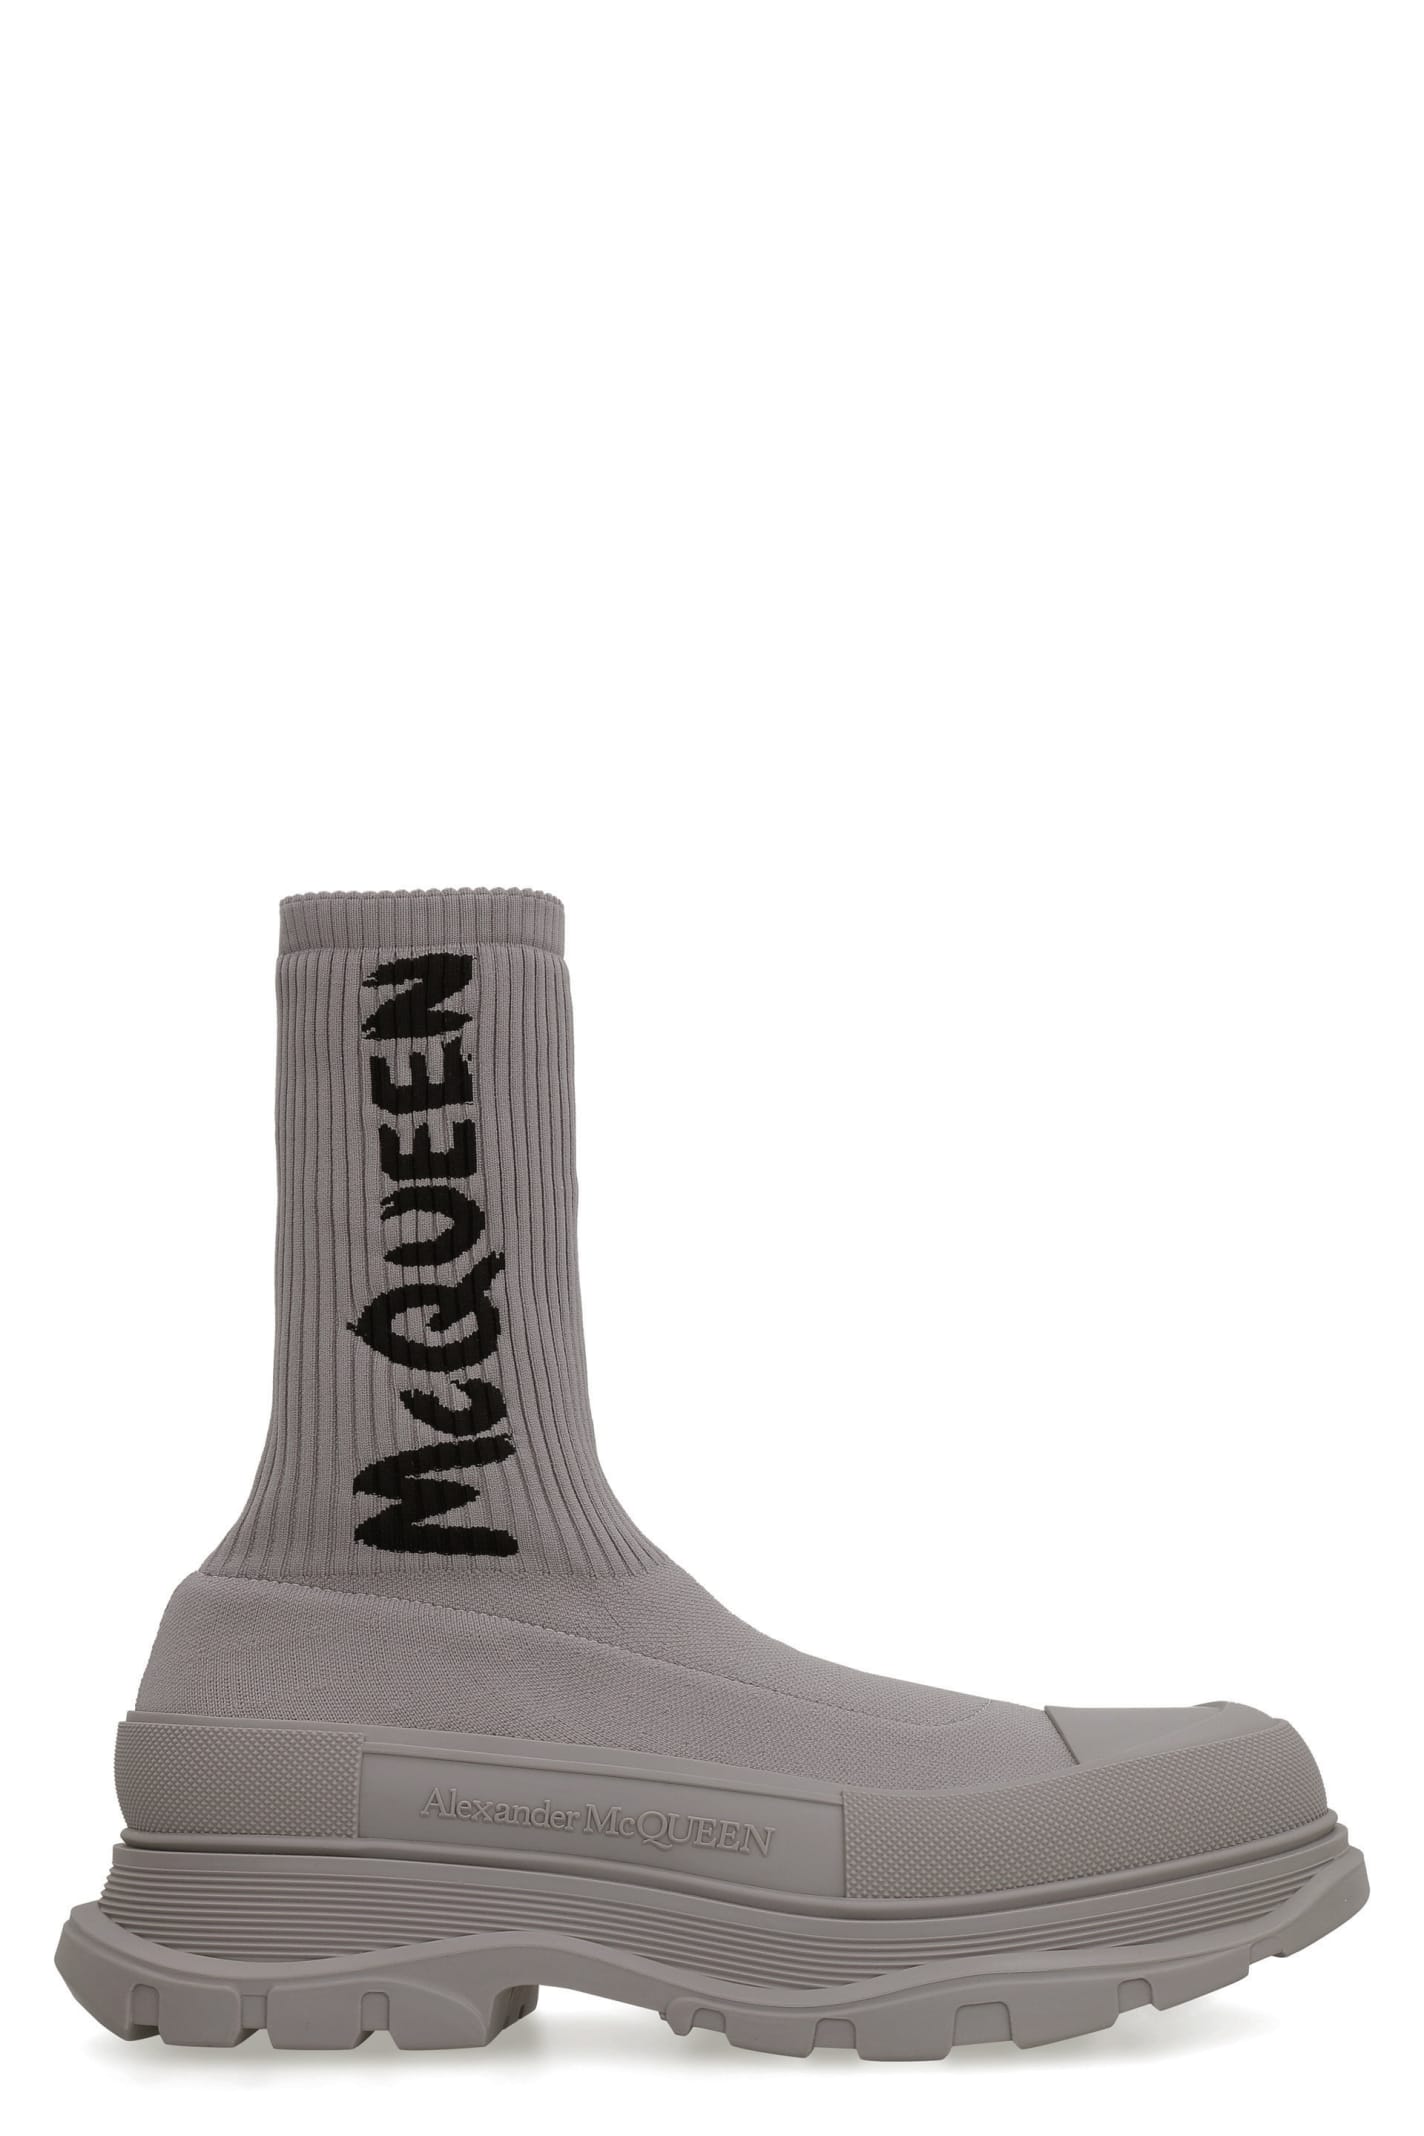 Alexander McQueen Tread Slick Knitted Ankle Boots